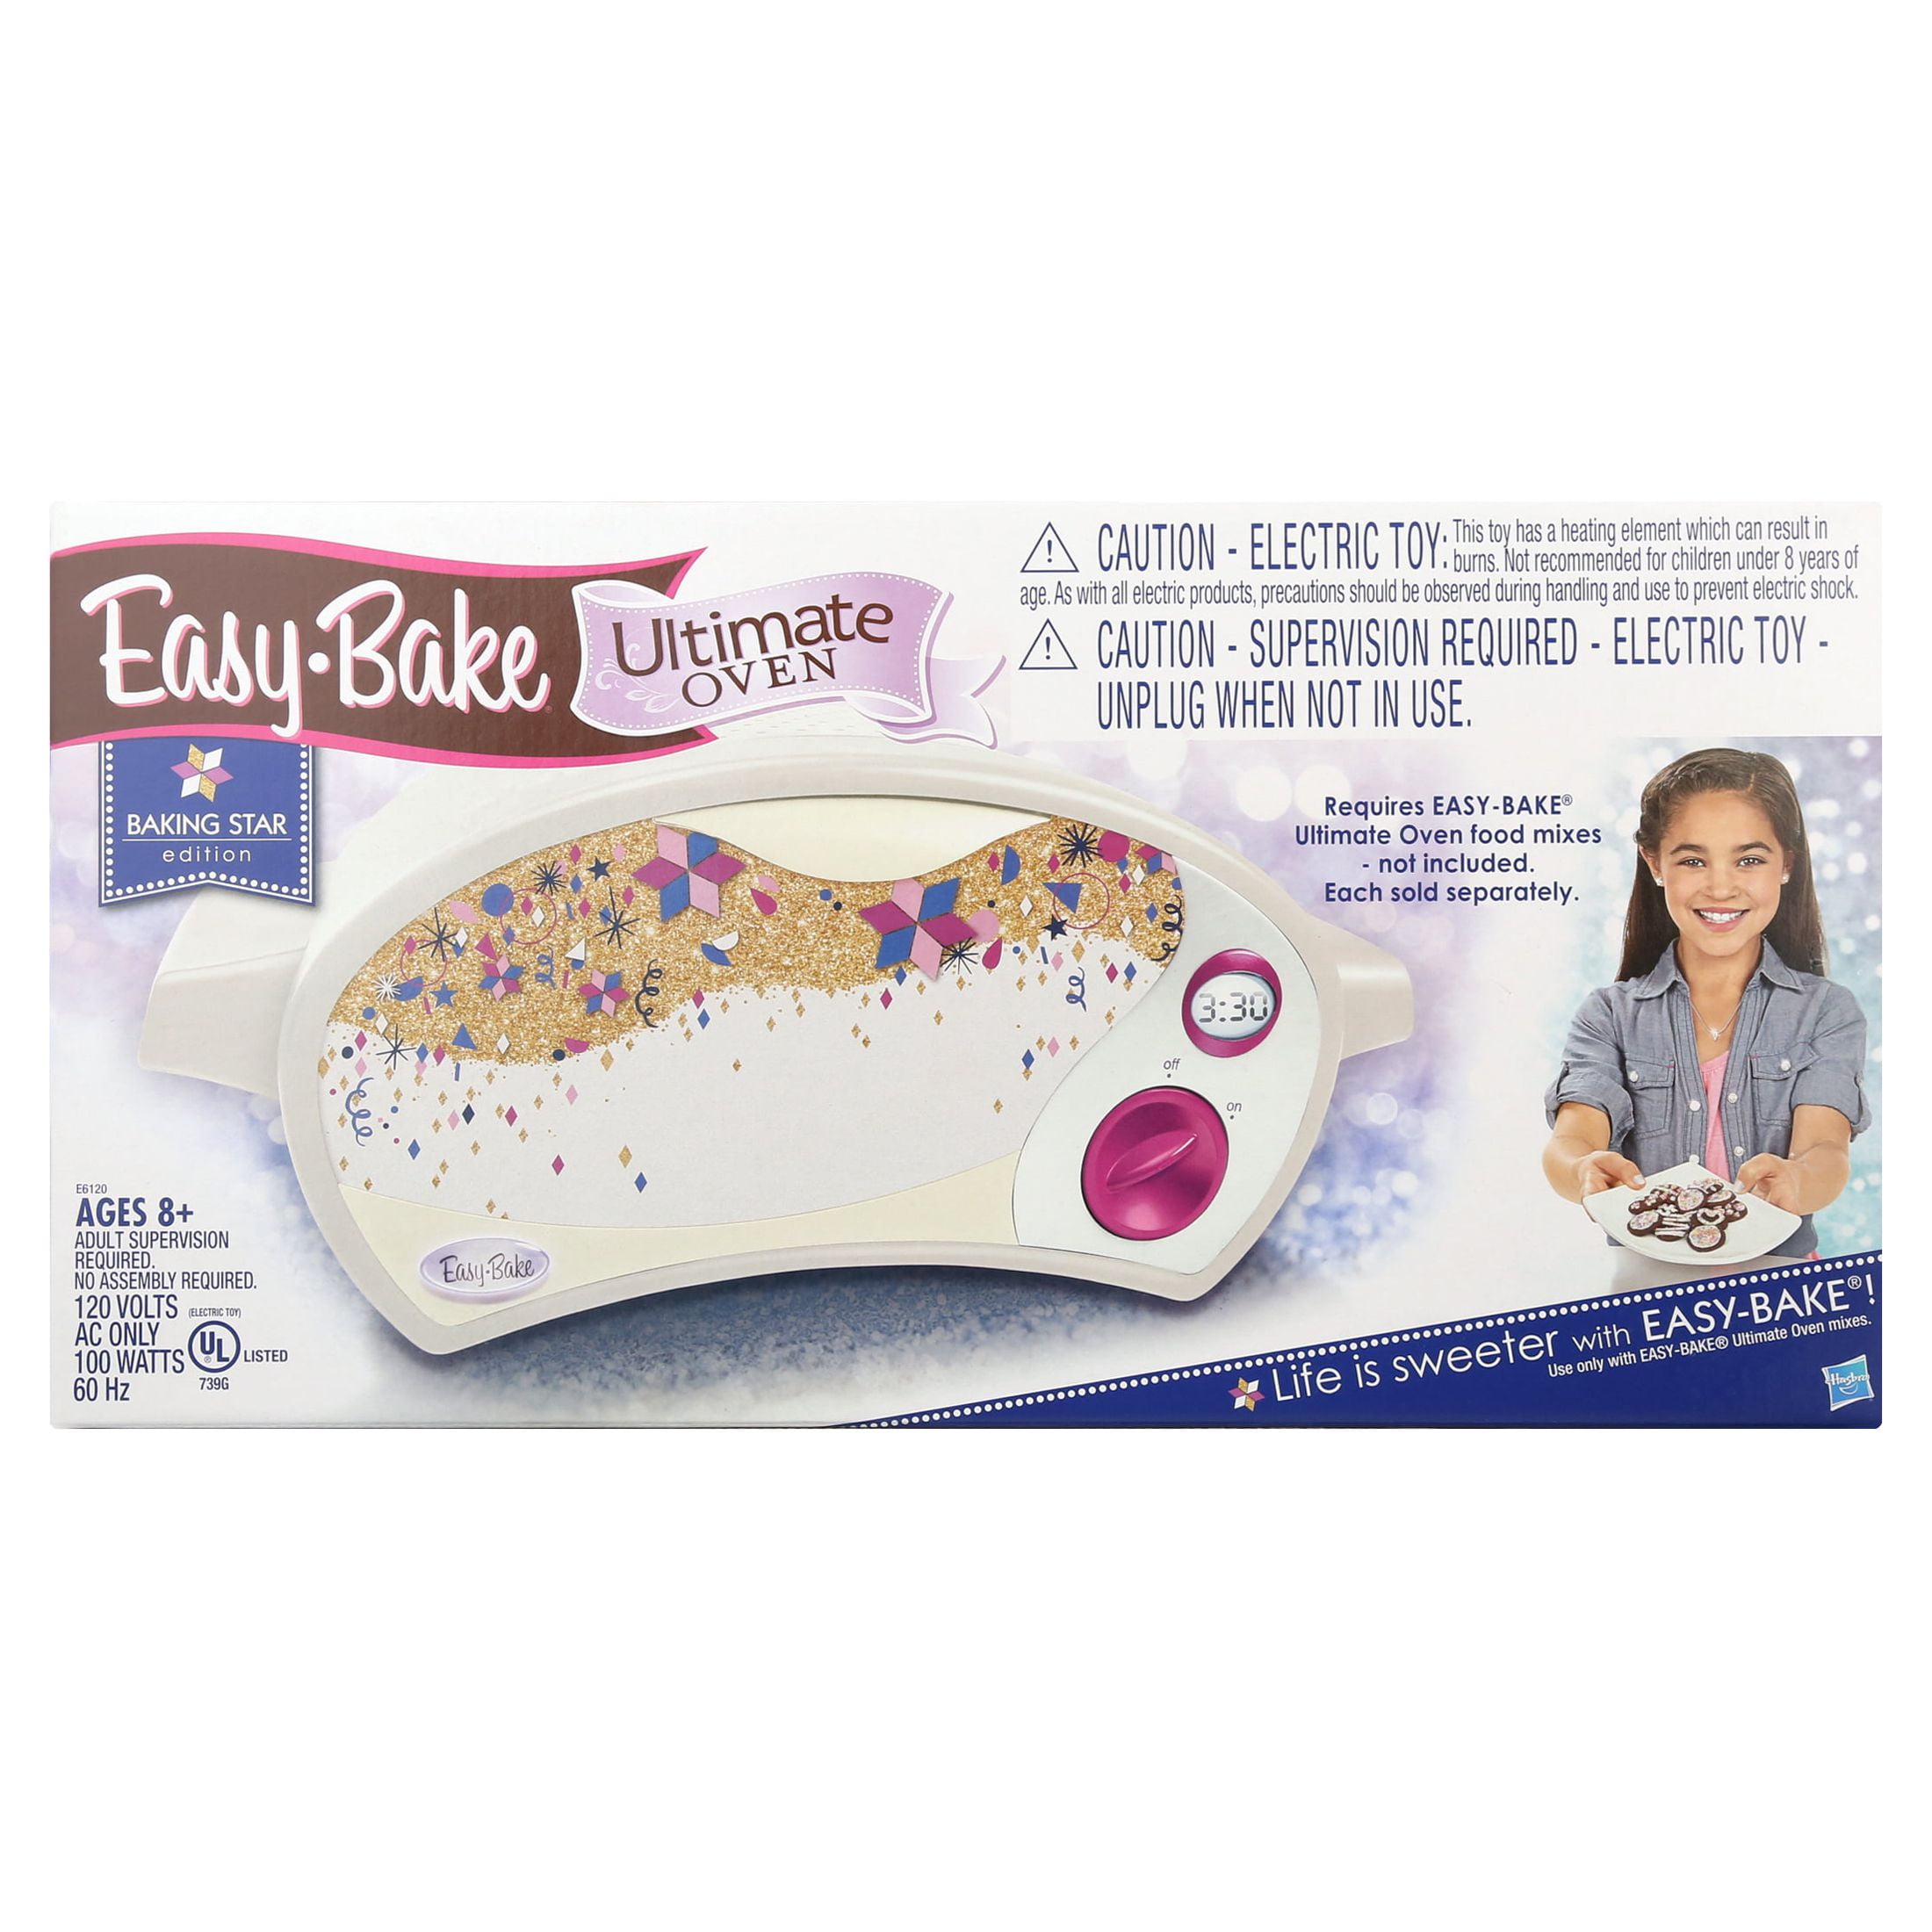 We Tried An Easy-Bake Oven For The First Time 